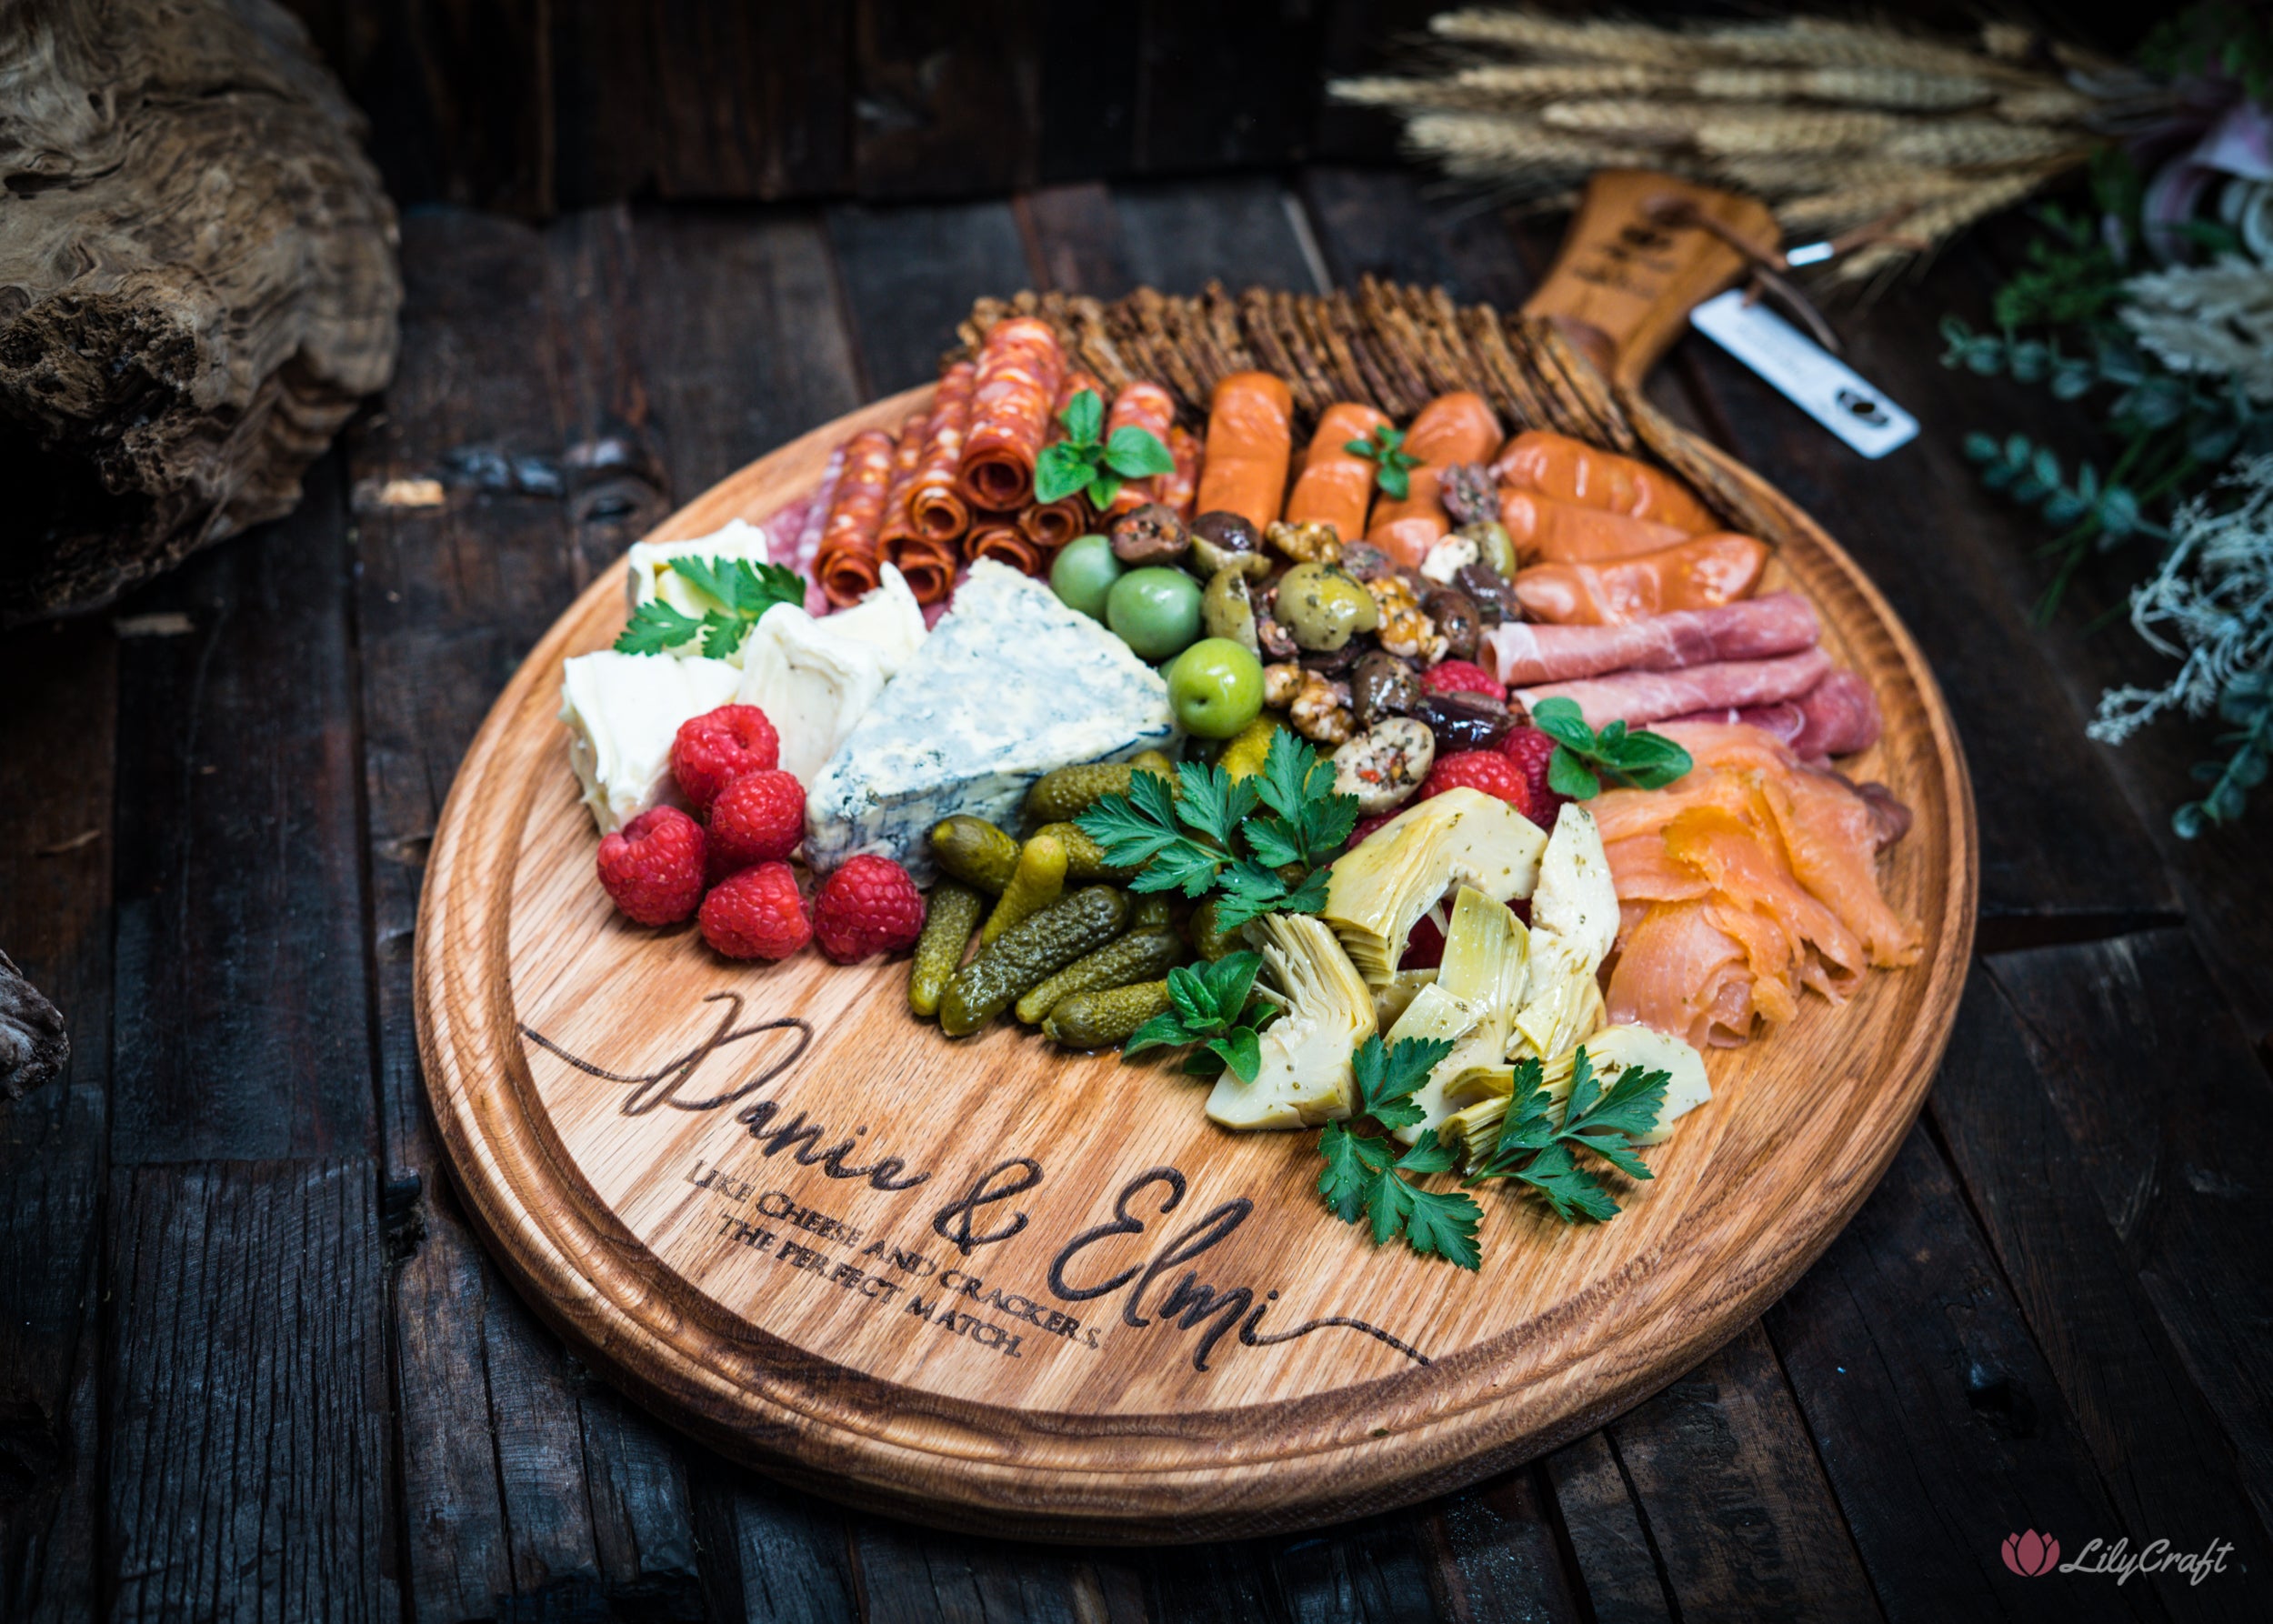 Introducing an extra-large cheese and charcuterie board in stunning red oak. Make a statement with this versatile serving platter perfect for any occasion.